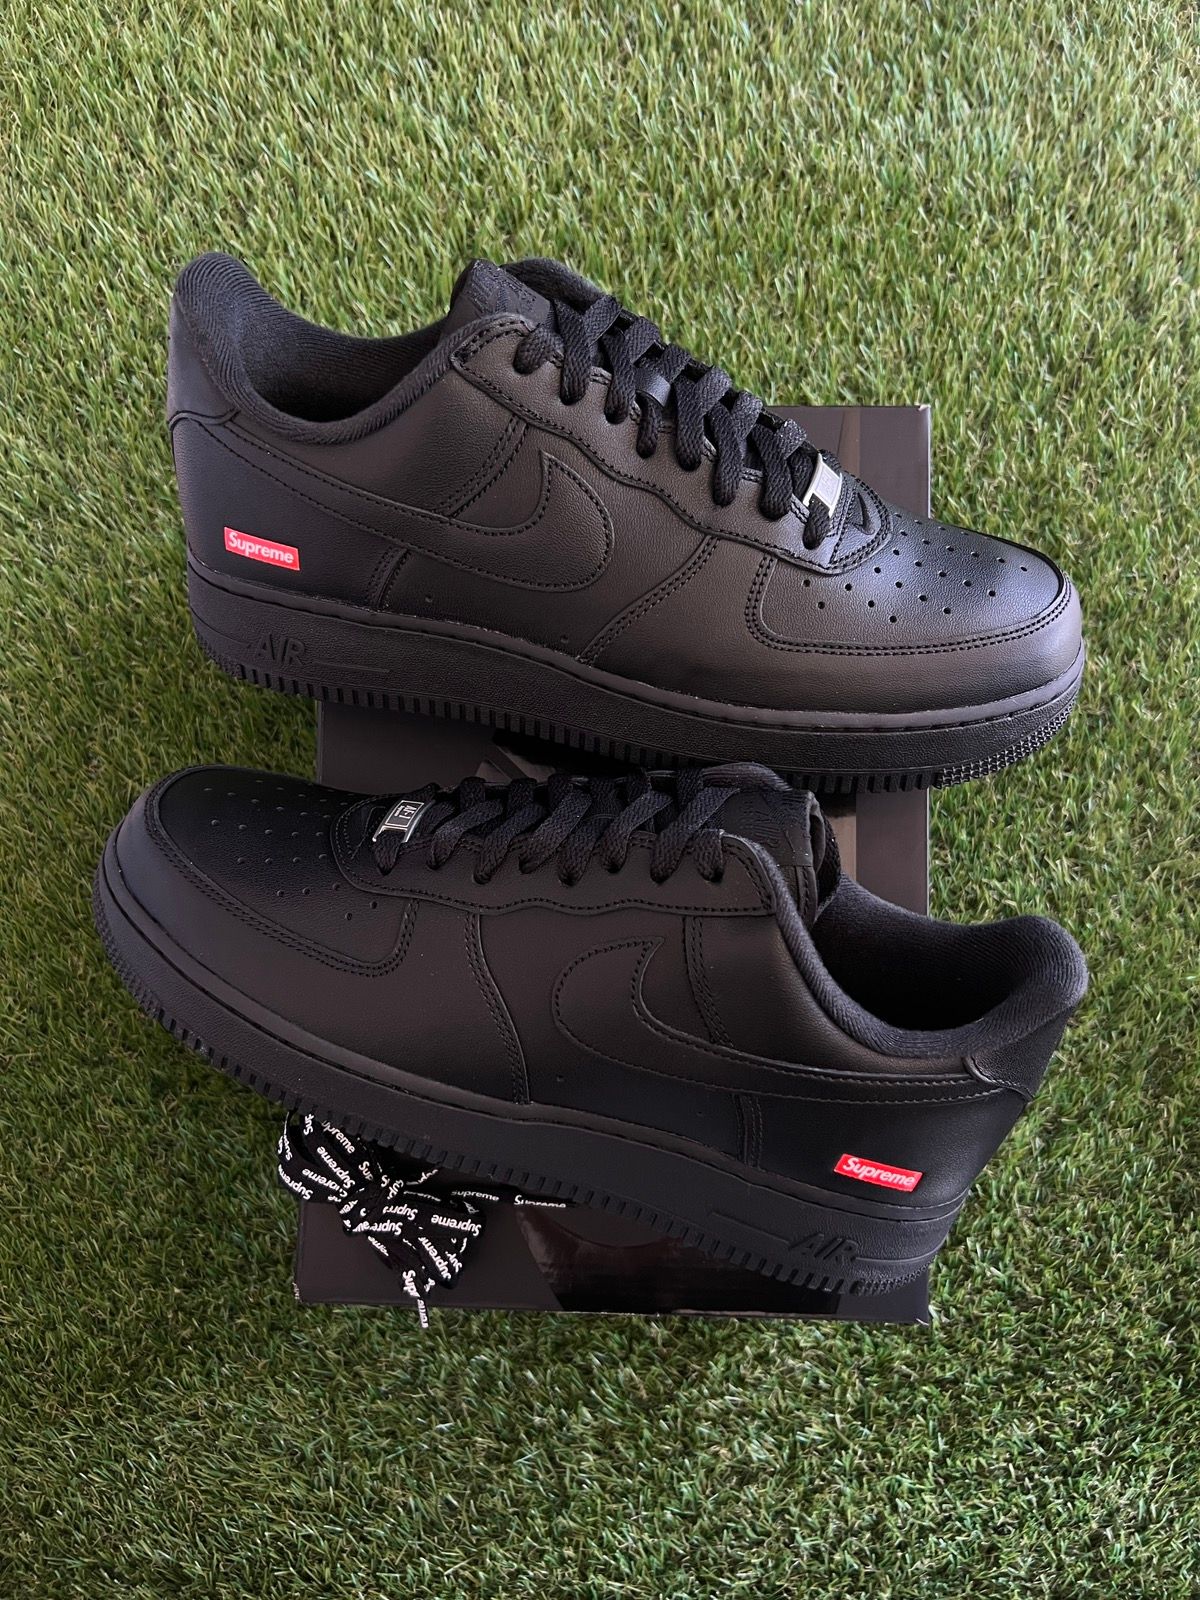 Pre-owned Nike X Supreme Nike Air Force 1 ‘black' Size 13 Shoes